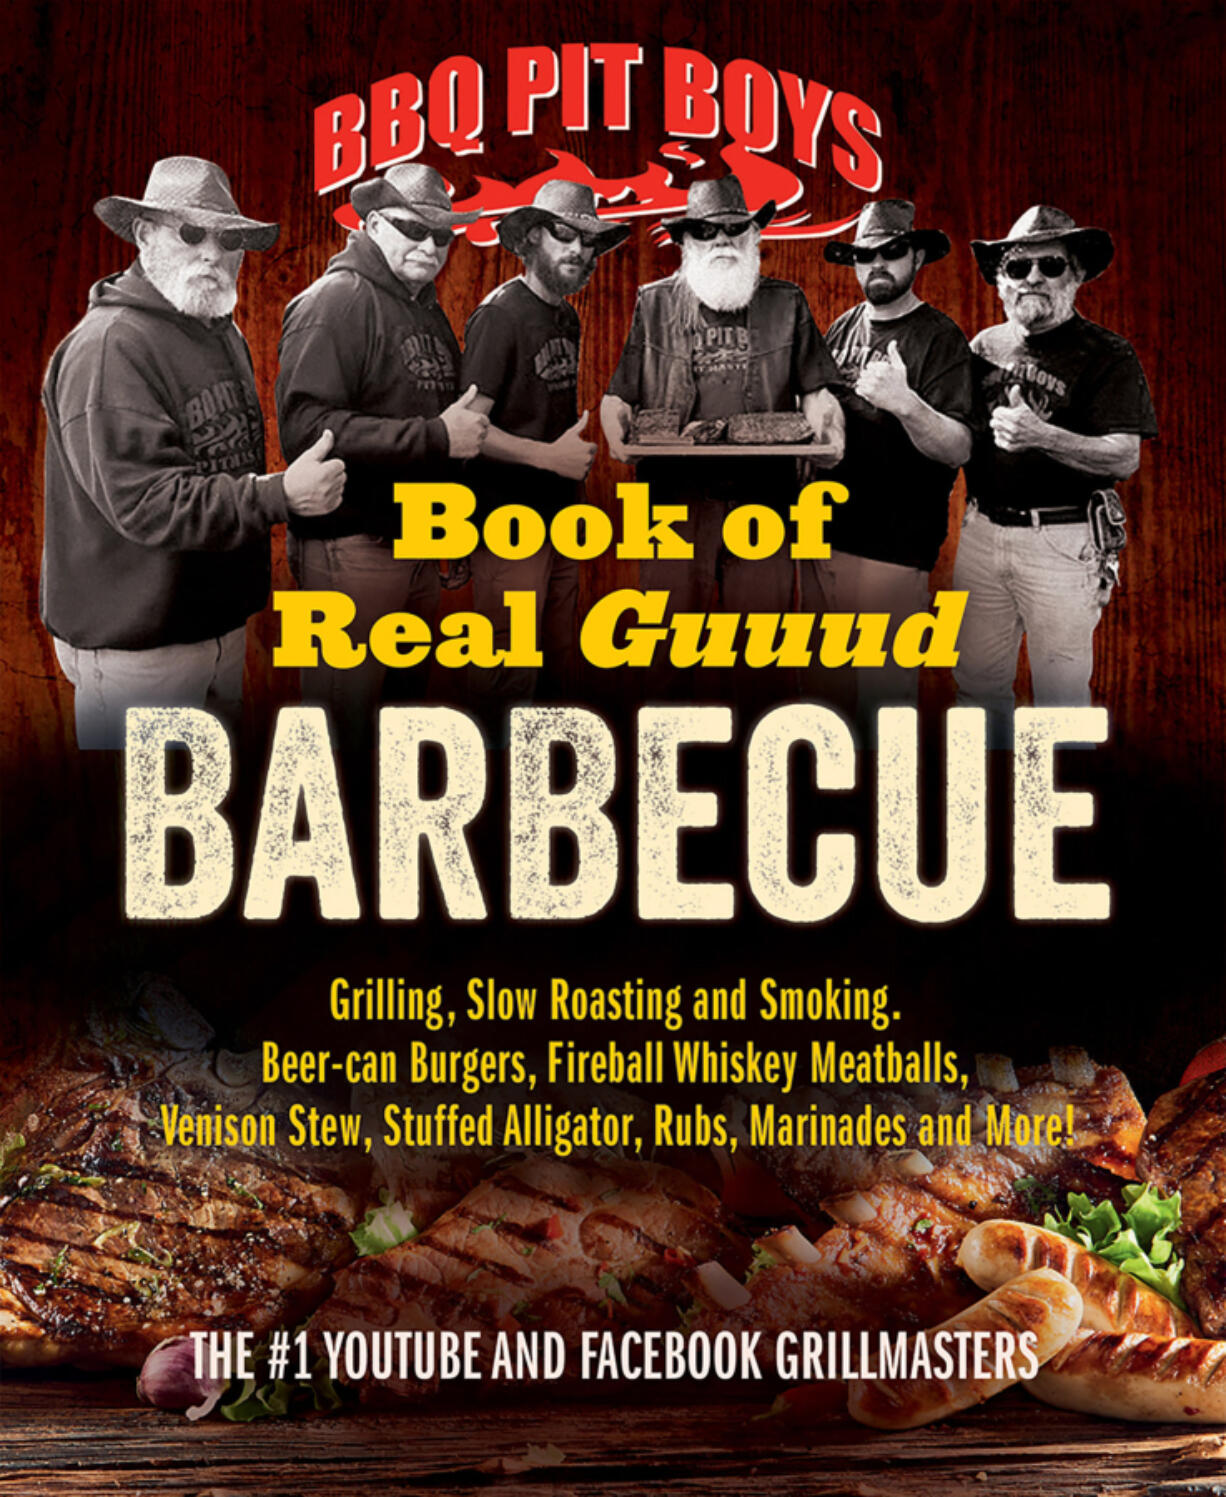 &ldquo;BBQ Pit Boys Book of Real Guuud Barbecue.&rdquo; (Firefly Books)